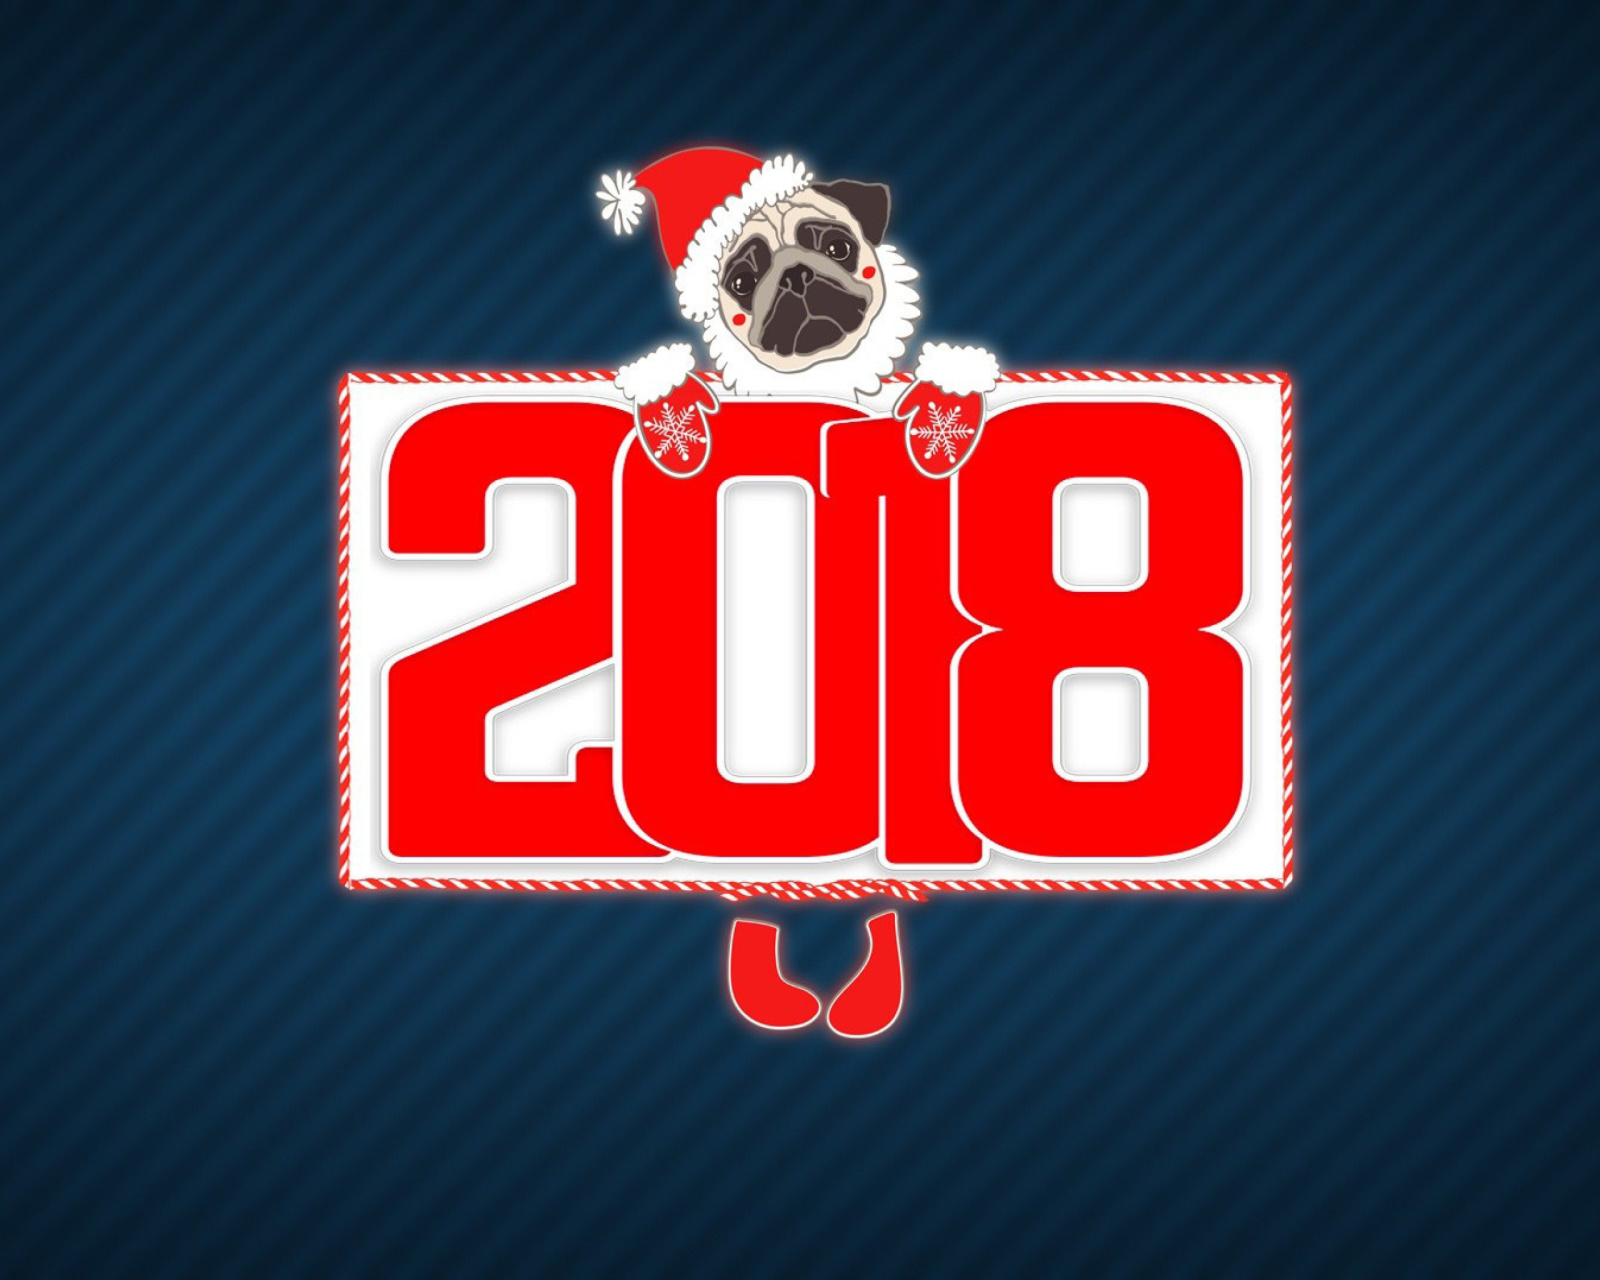 2018 New Year Chinese horoscope year of the Dog wallpaper 1600x1280